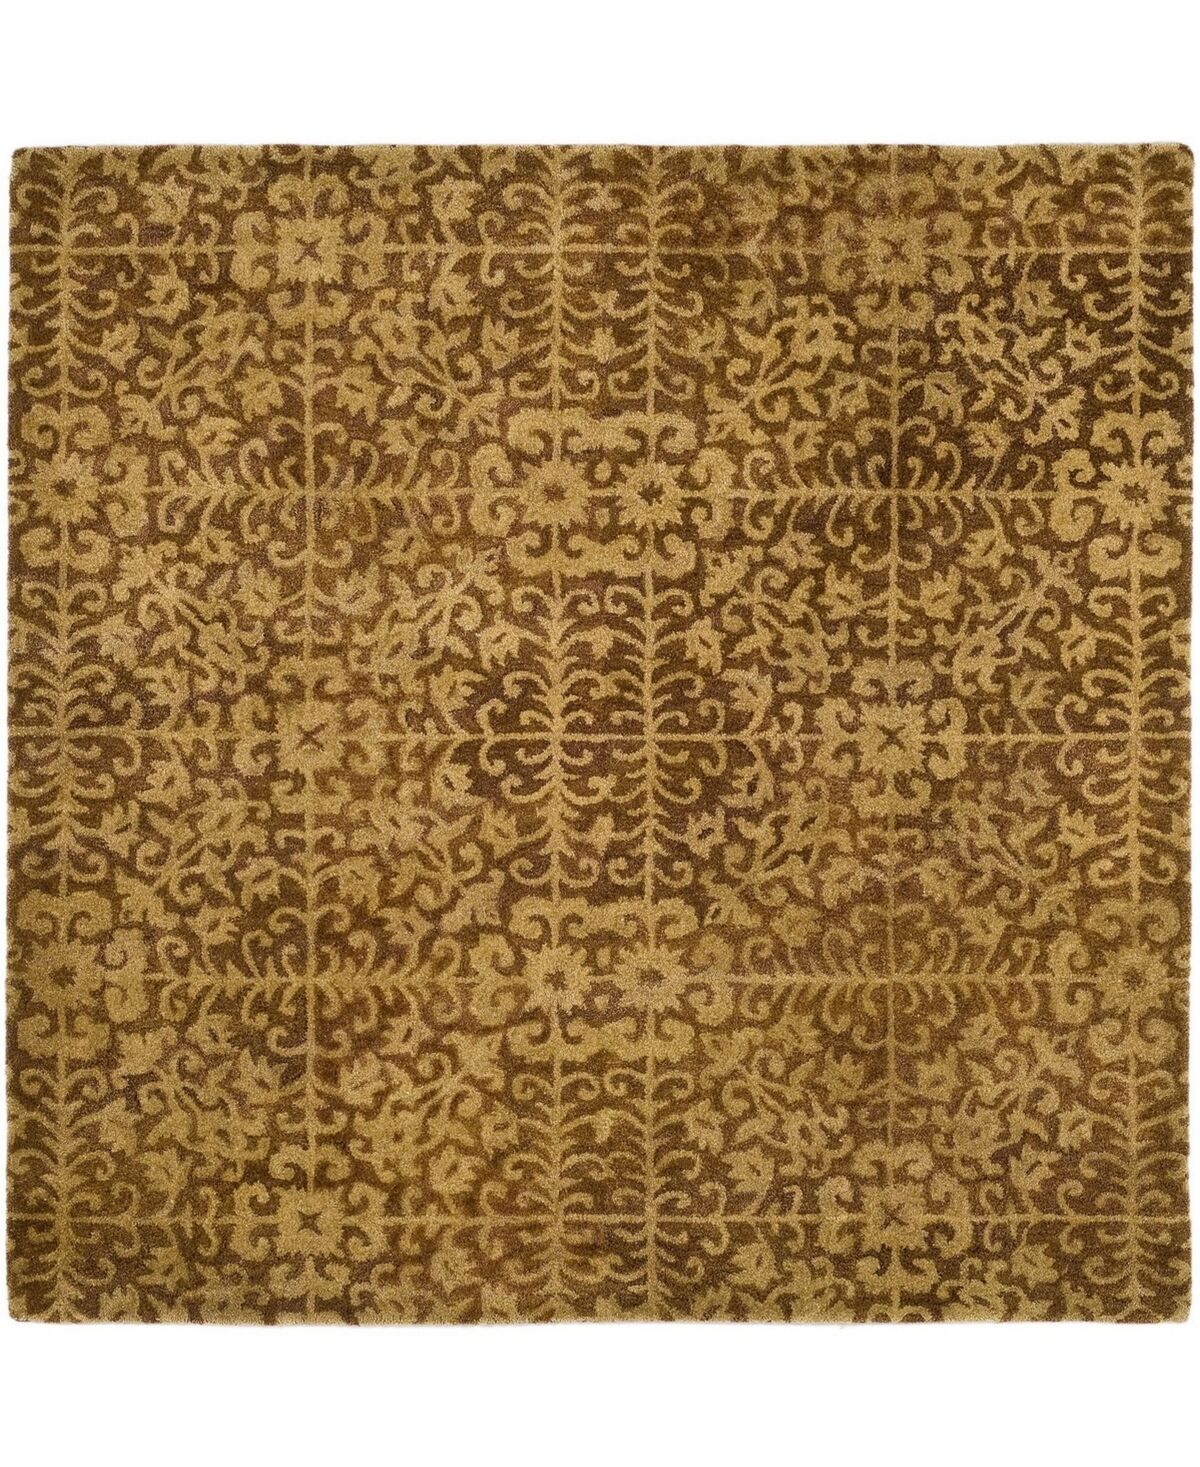 Safavieh Antiquity At411 Gold and Beige 8' x 8' Square Area Rug - Gold